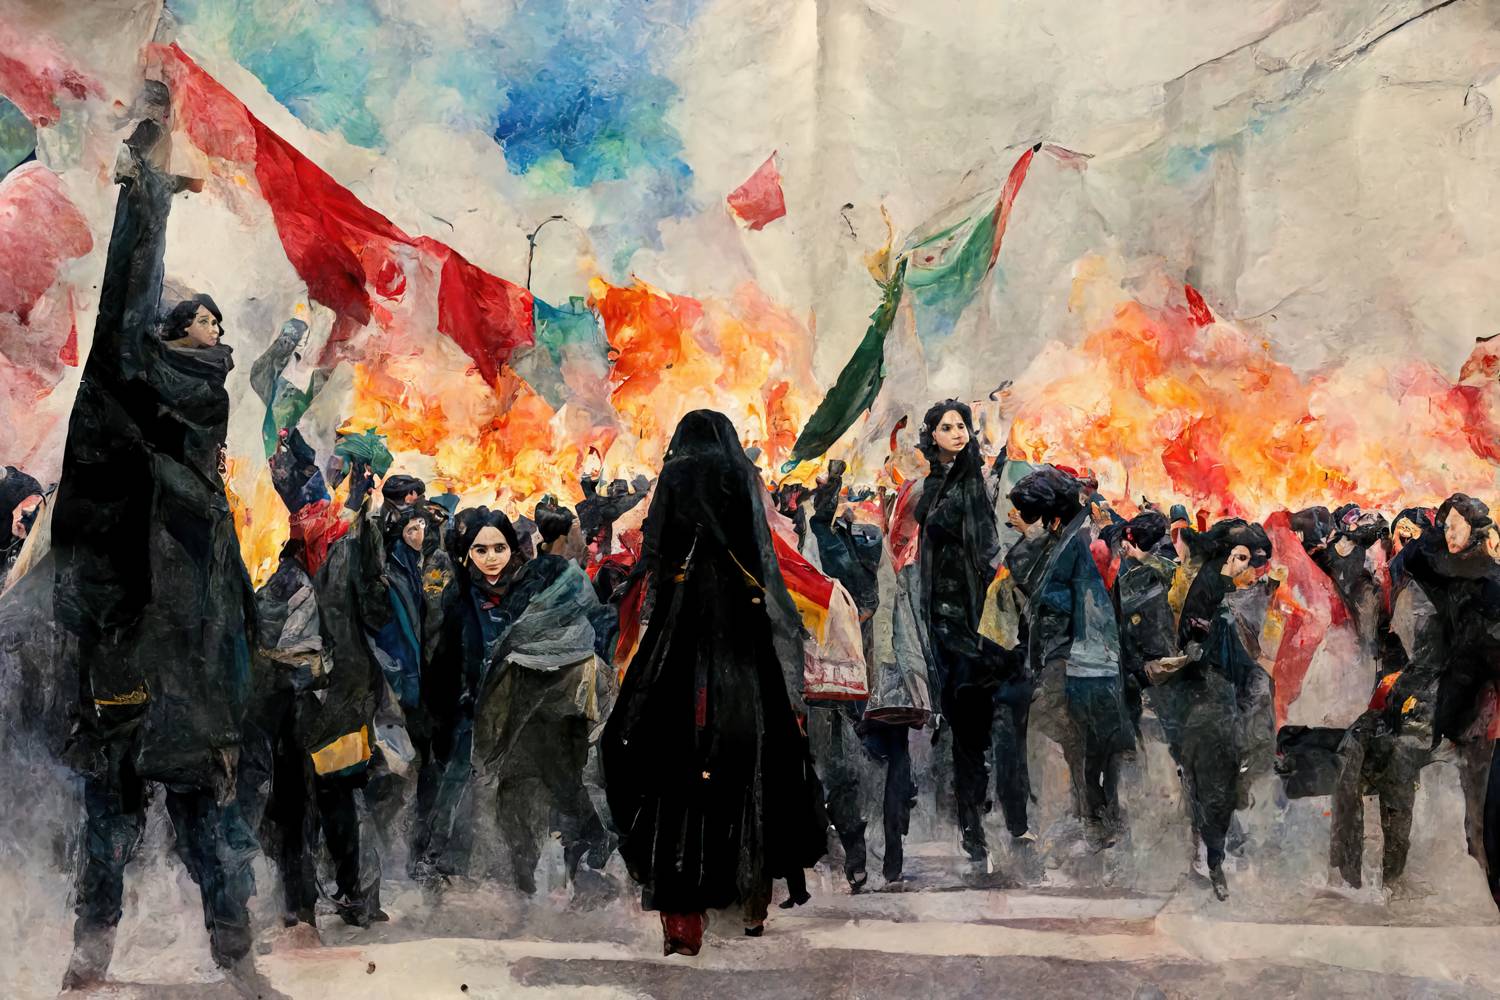 Watercolour,Digital,Painting,Of,Anti,Hijab,And,Anti,Government,Protests. Photo: Copyright (c) 2022 DigitalAssetArt/Shutterstock.  No use without permission.